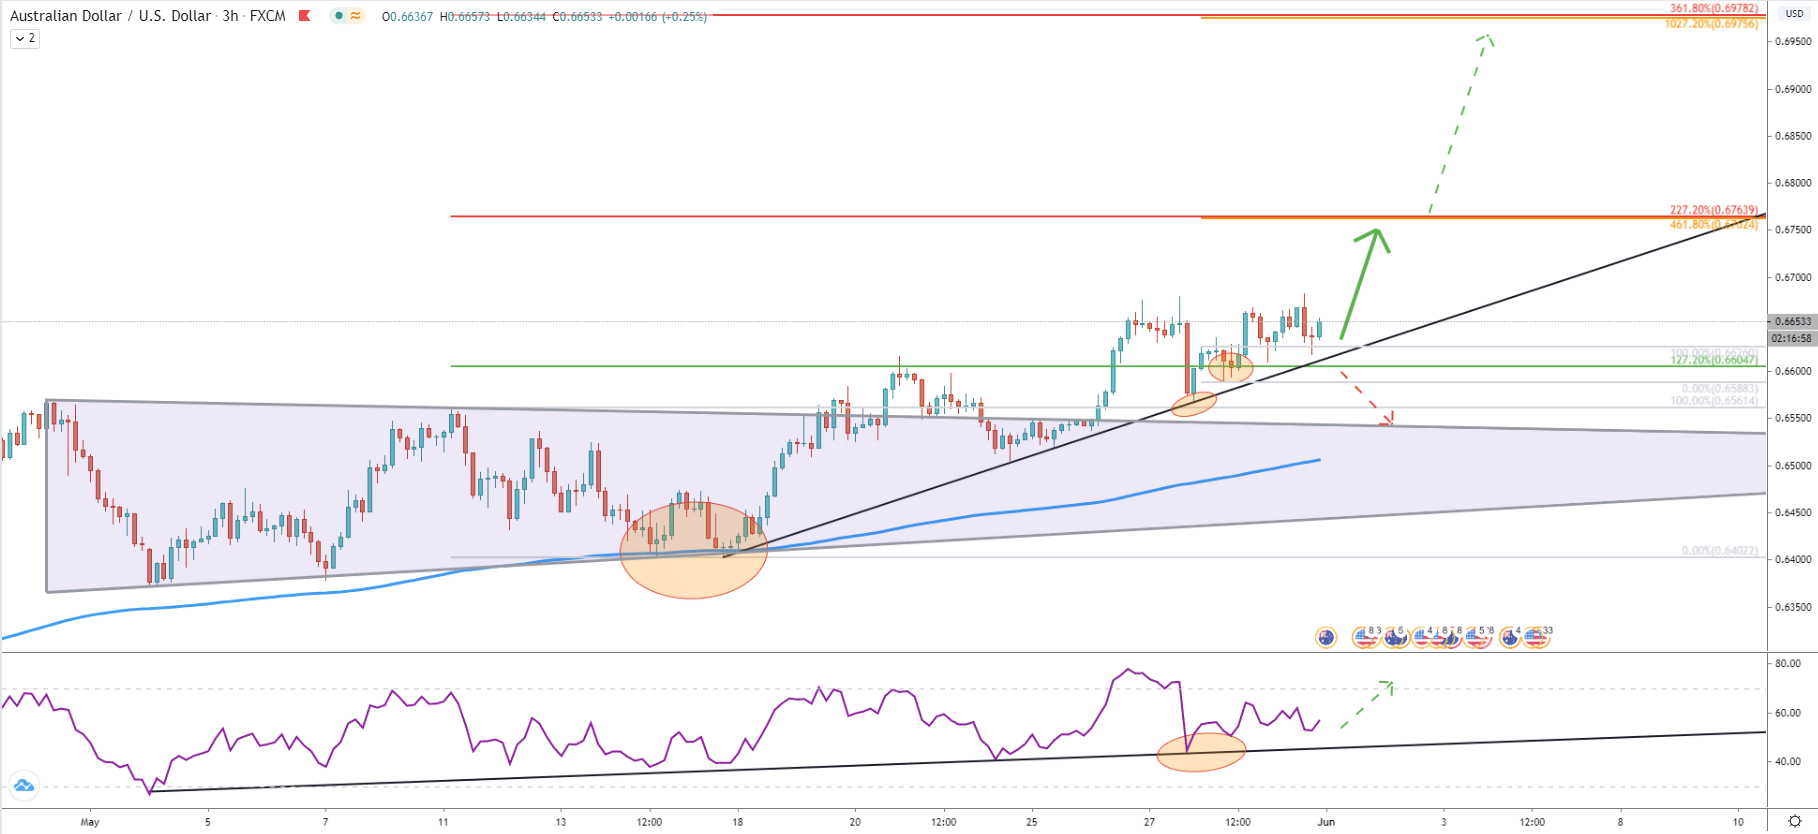 AUD/USD 3-Hour Technical Analysis 29 May 2020